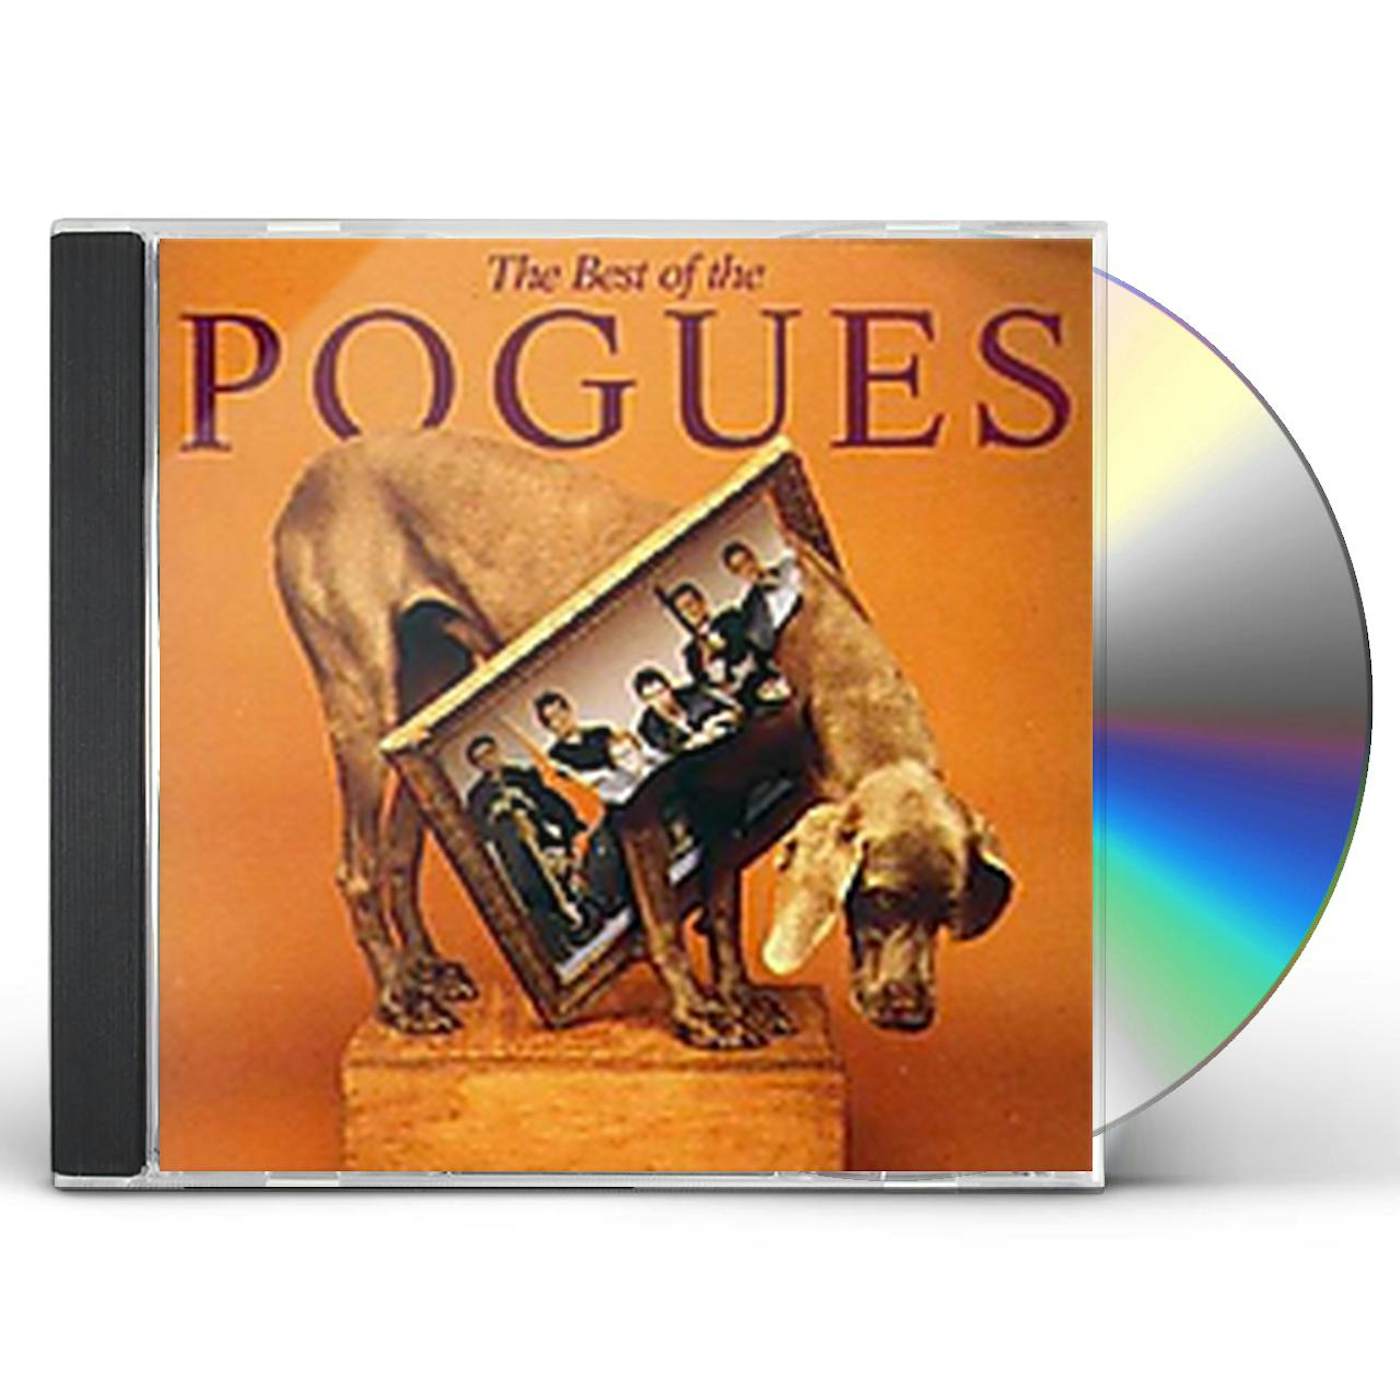 The Pogues BEST OF CD